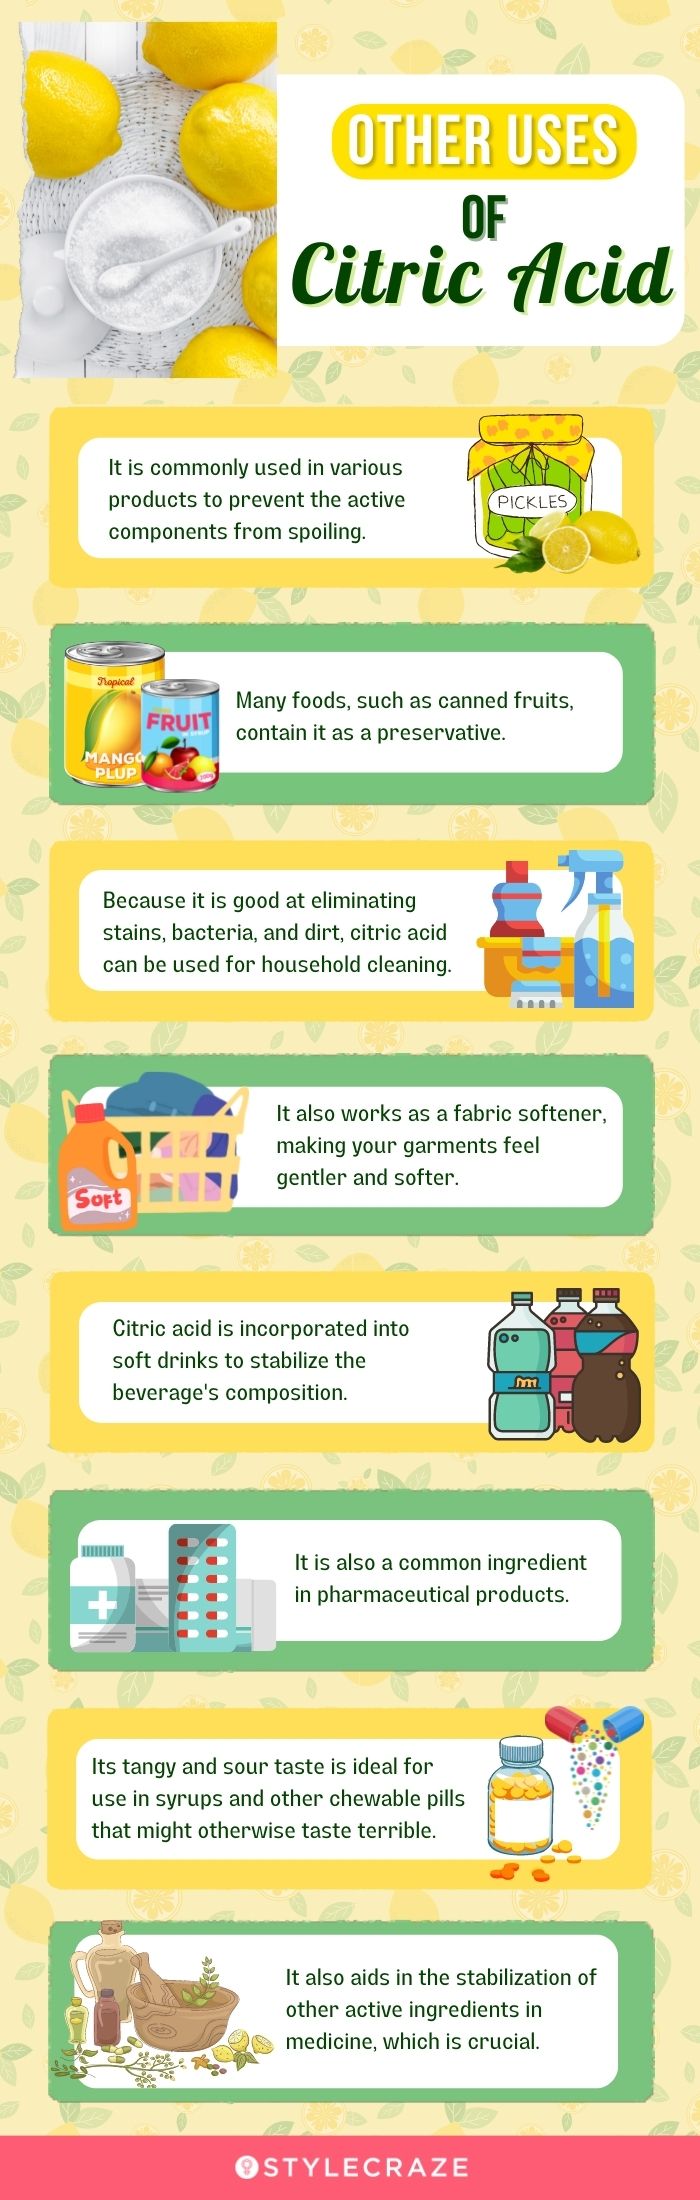 other uses of citric acid (infographic)